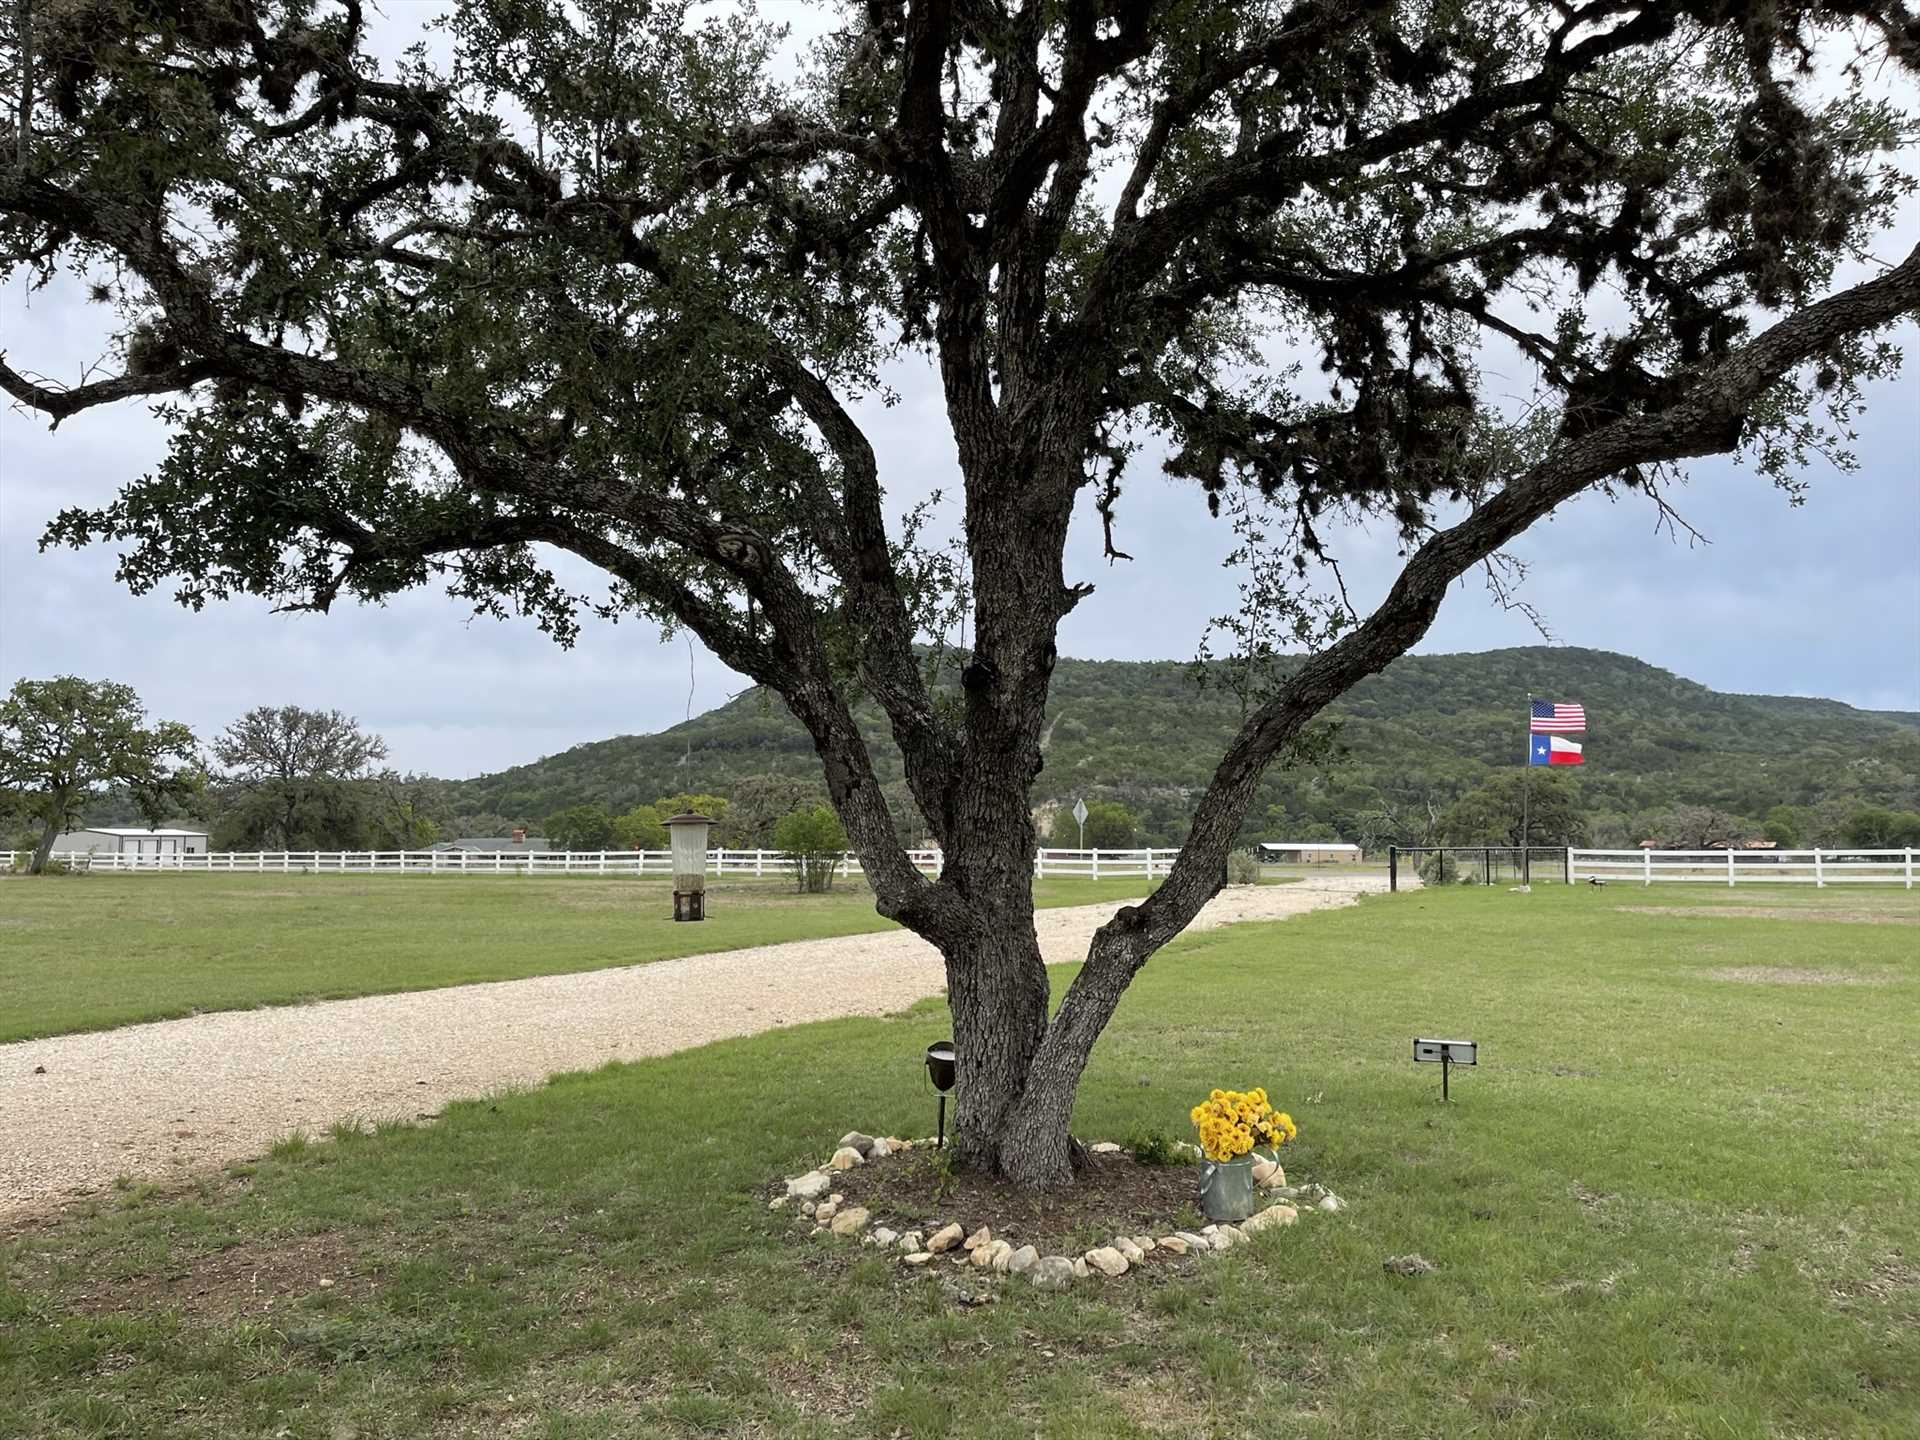                                                 Impressive mountain views and wide-open skies make this one of the most beautiful spots in the Texas Hill Country!